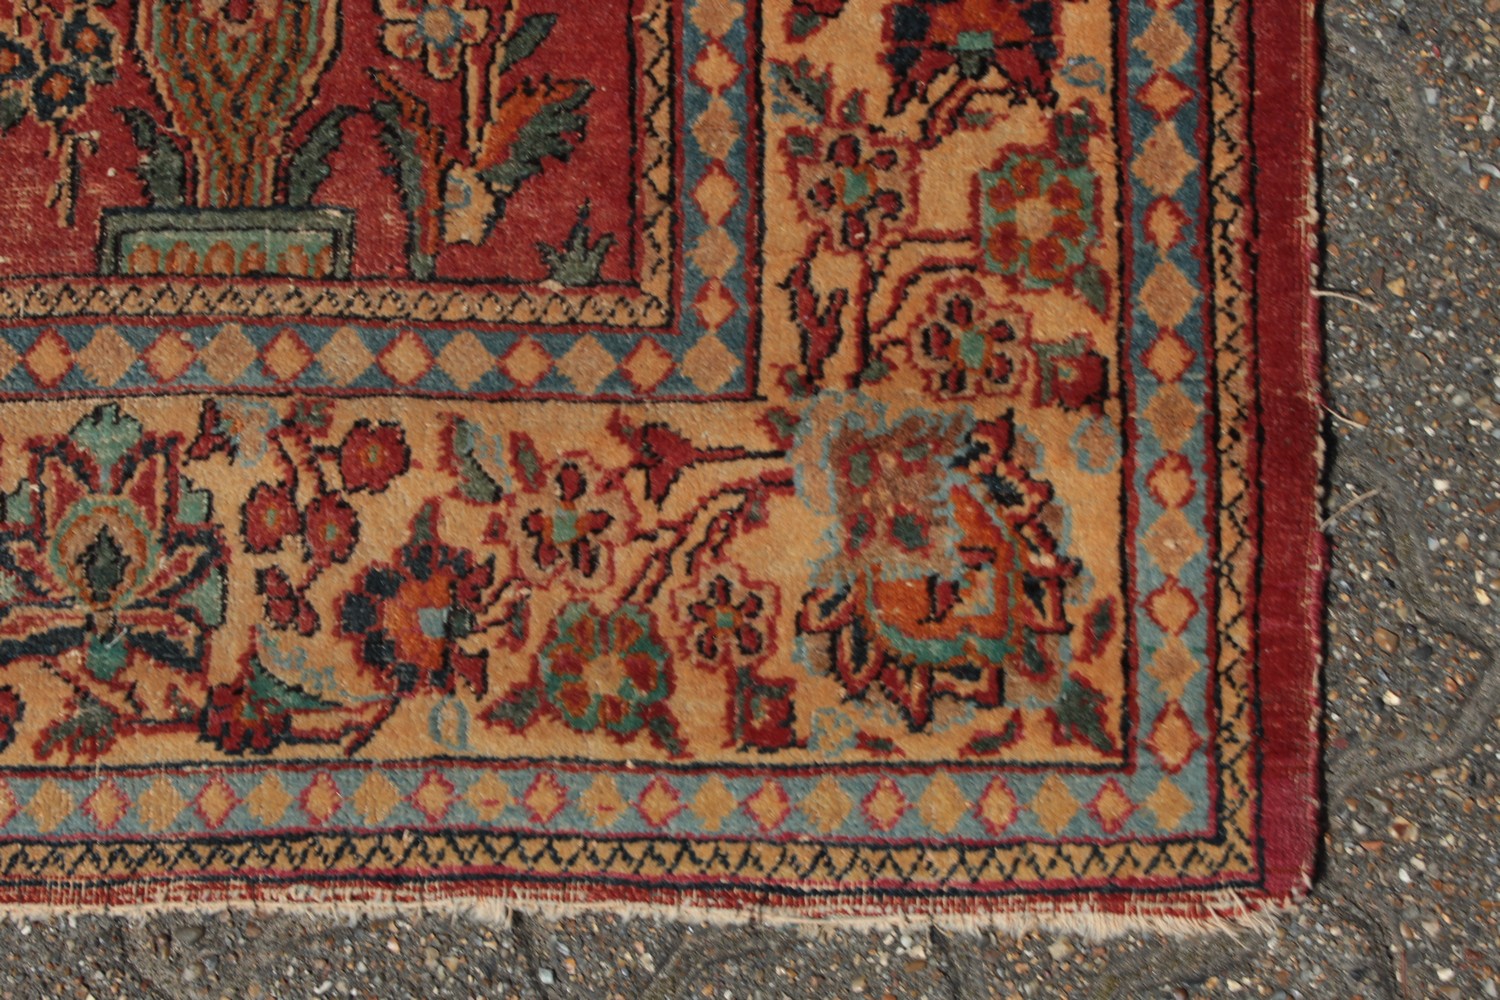 A PERSIAN KASHAN RUG with floral central motifs on a red ground with foliate border. 6ft 6ins x - Image 6 of 10